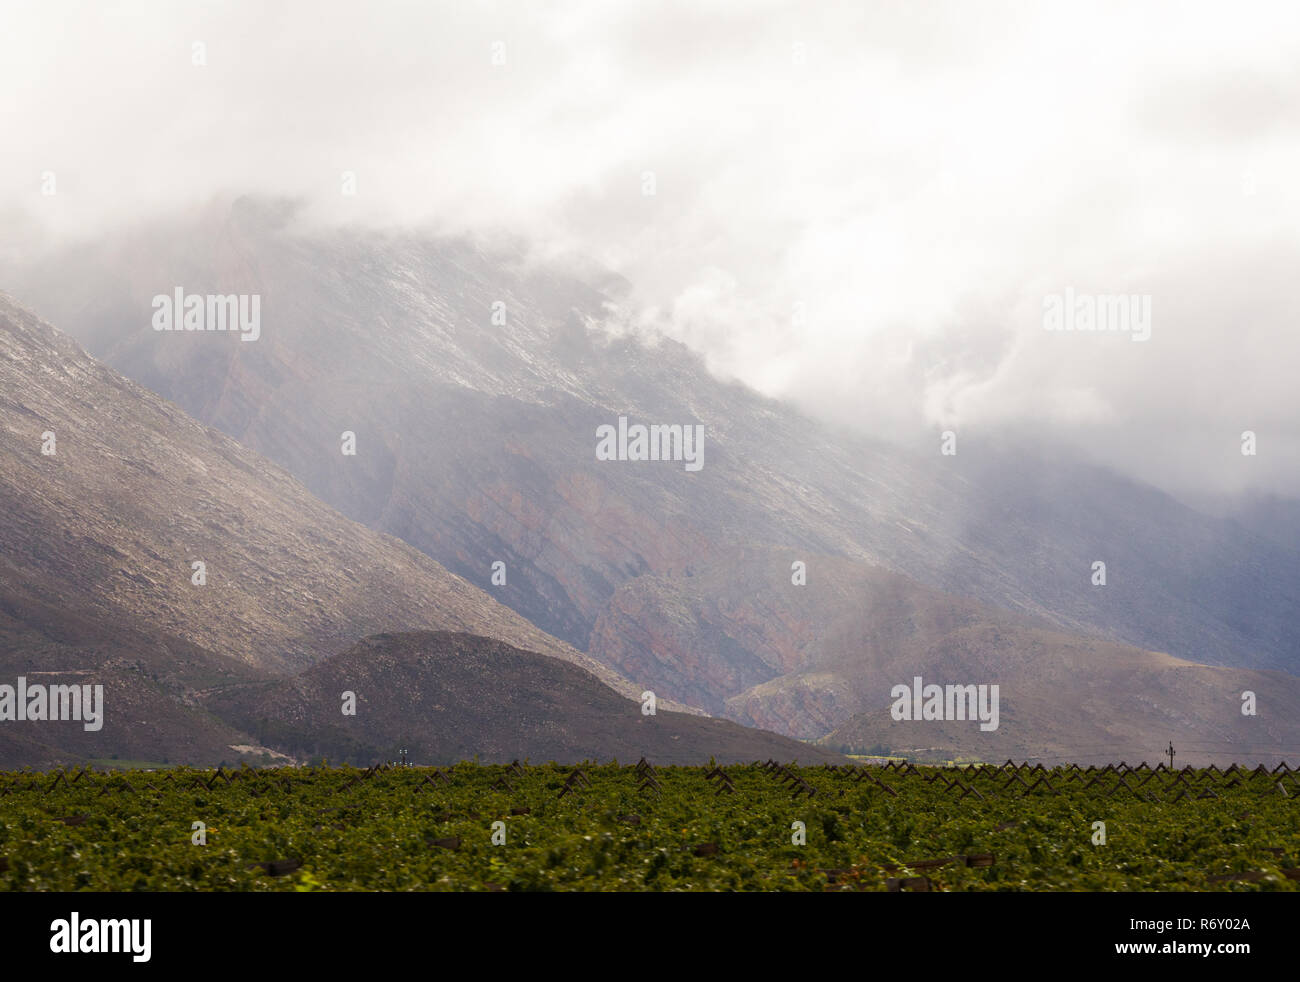 dramatic mountain landscape with light shining through rain clouds onto wet surface, below is a valley of vineyards or grape vines Hex River Valley Stock Photo